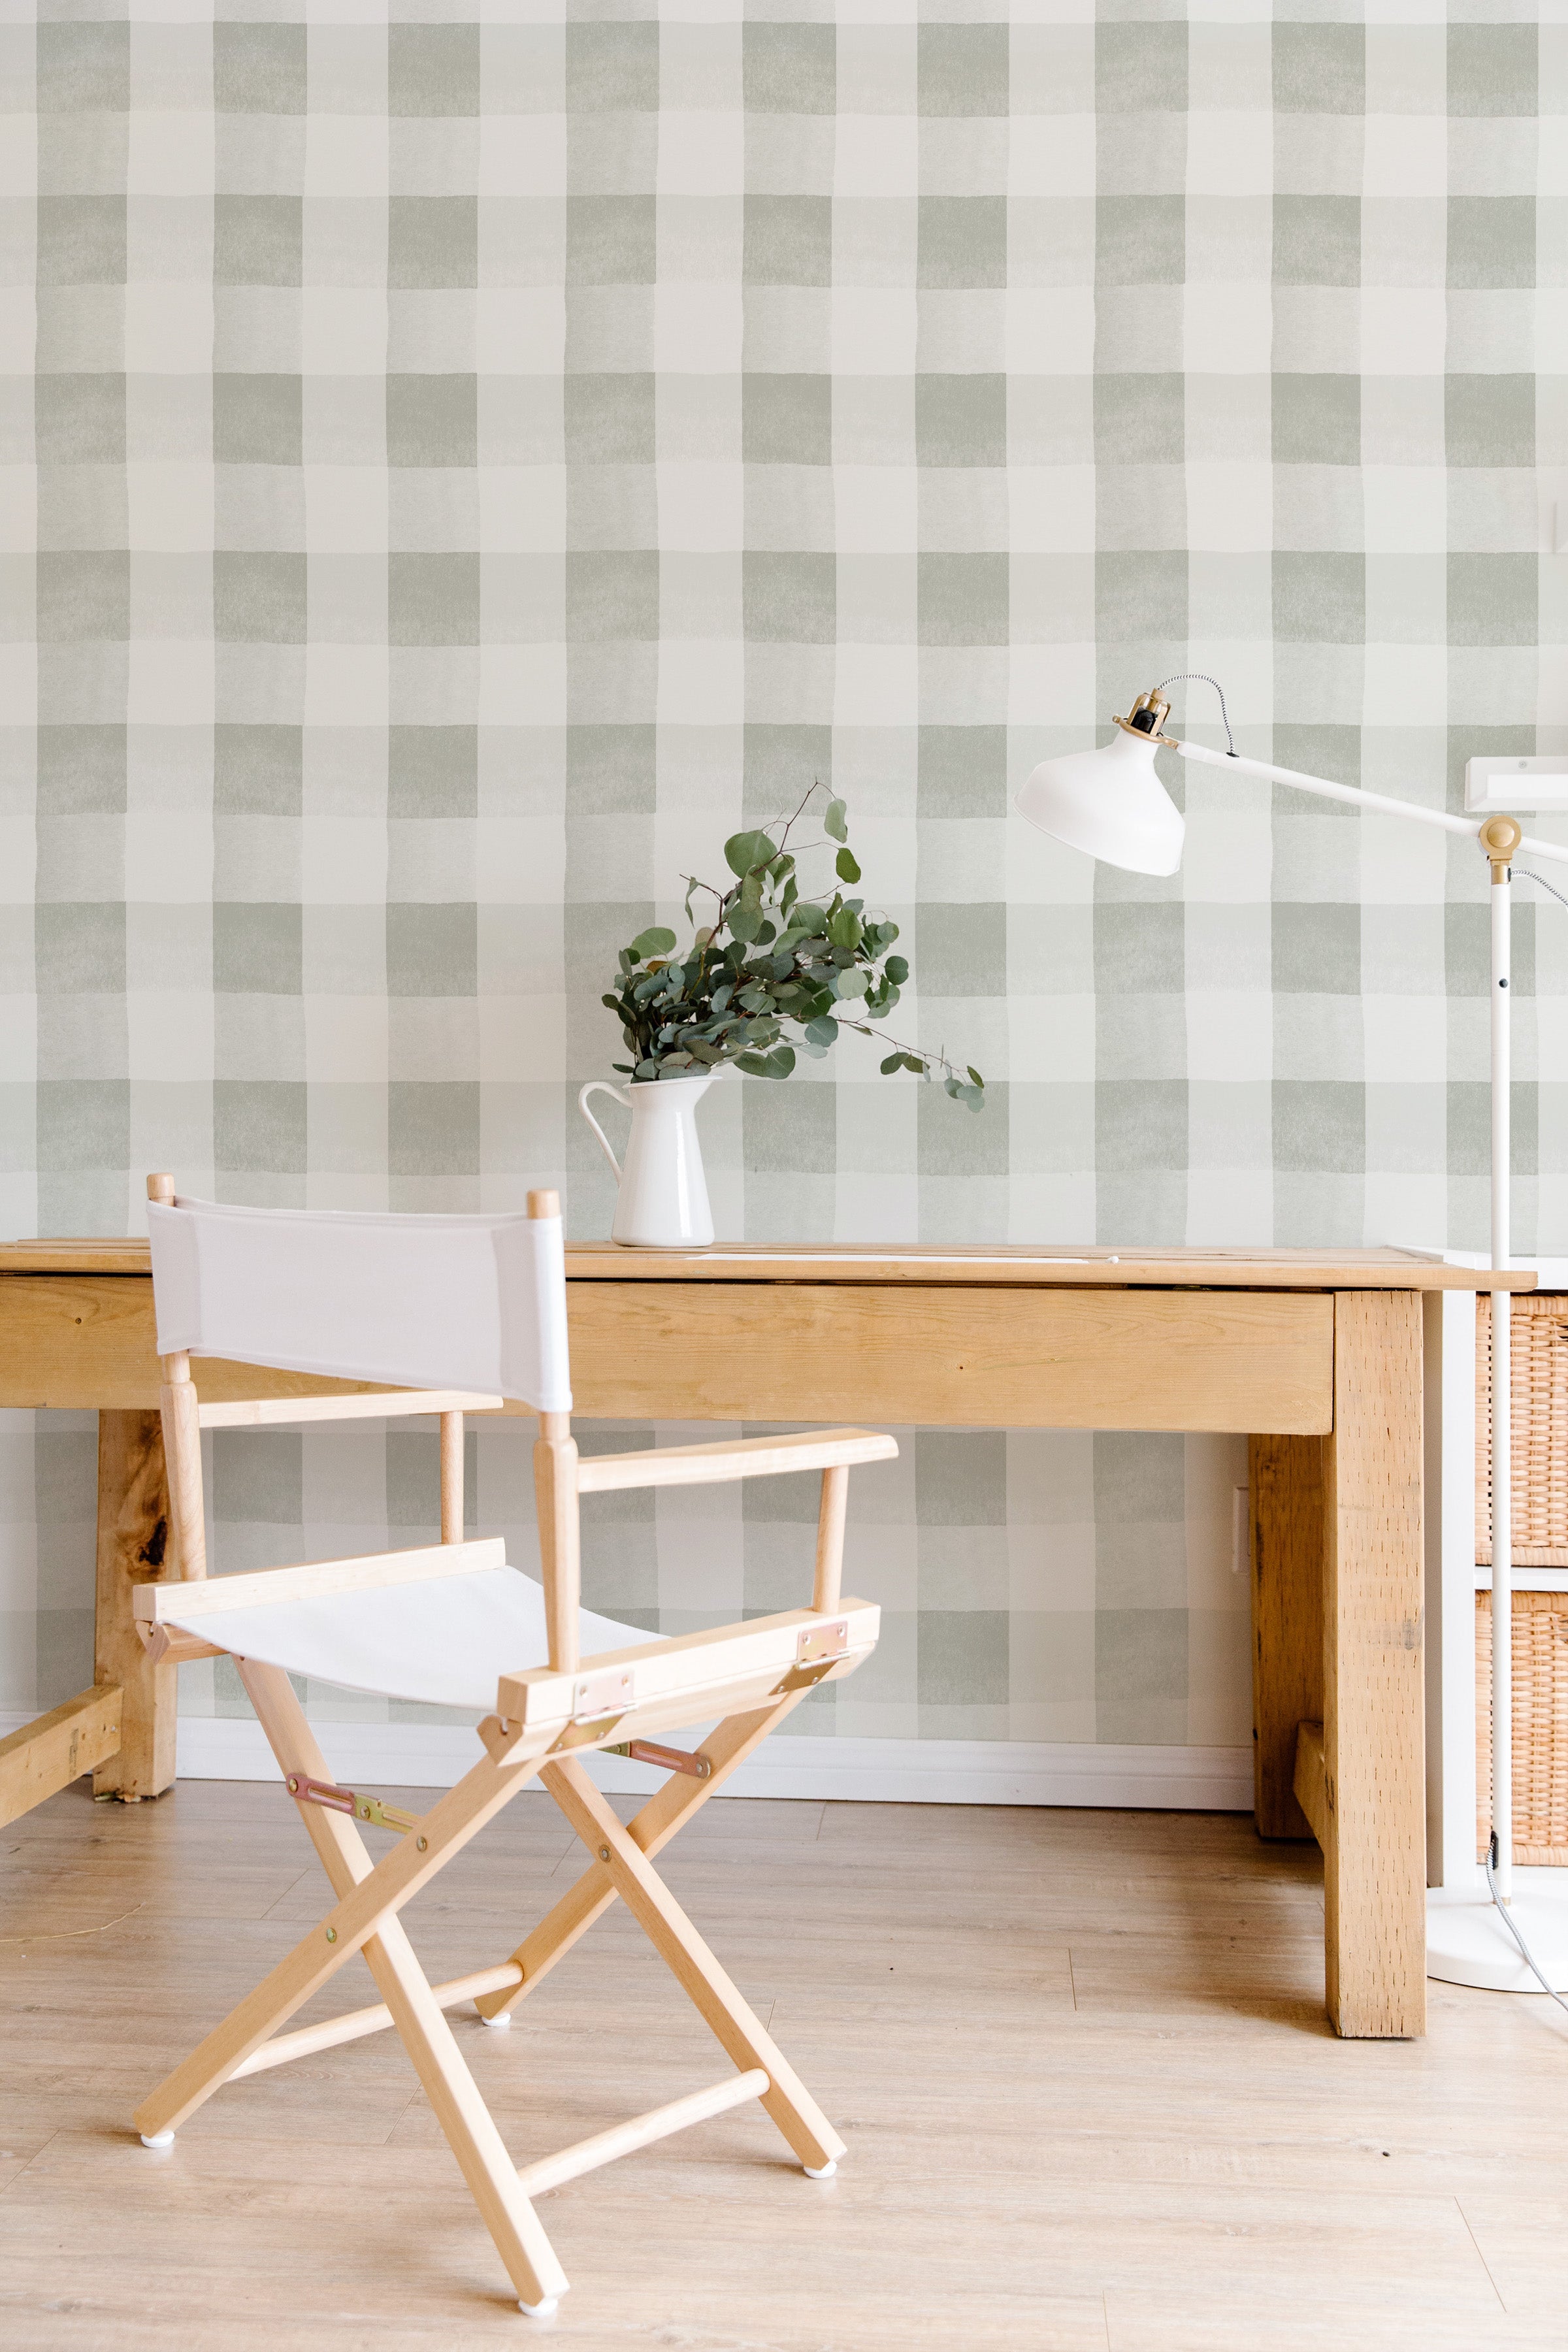 A vertical image featuring the Camille Wallpaper - Olive in a modern workspace. The wallpaper displays a large, olive green checkered pattern on an off-white background. A wooden desk with a director's chair in white, a vase with eucalyptus branches, and a white desk lamp complete this simple yet stylish scene.